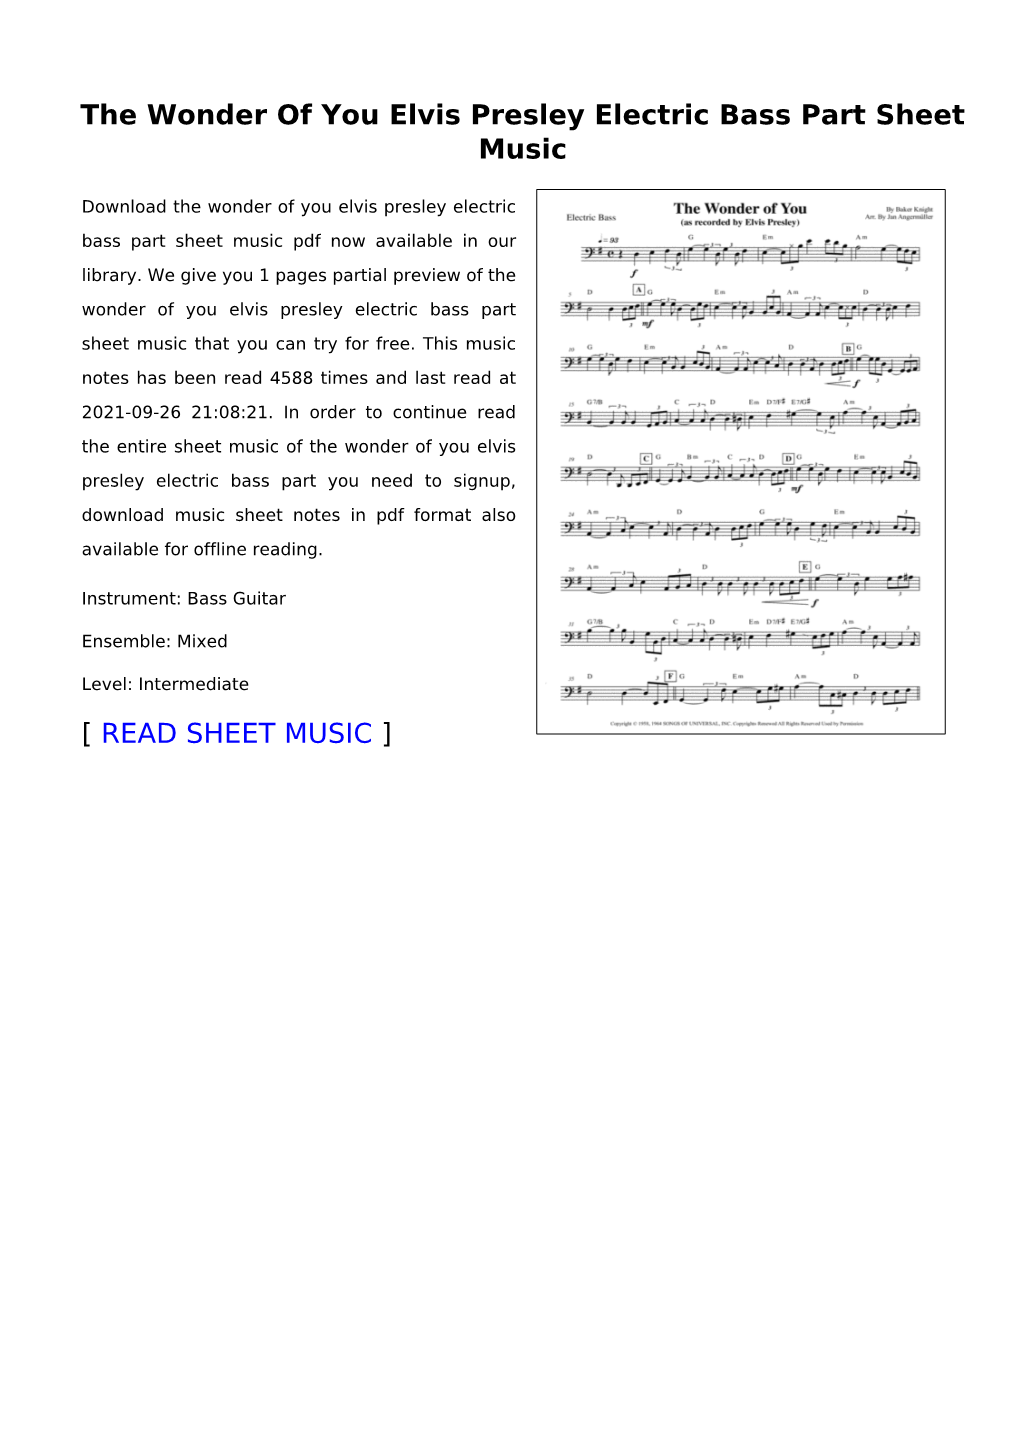 The Wonder of You Elvis Presley Electric Bass Part Sheet Music